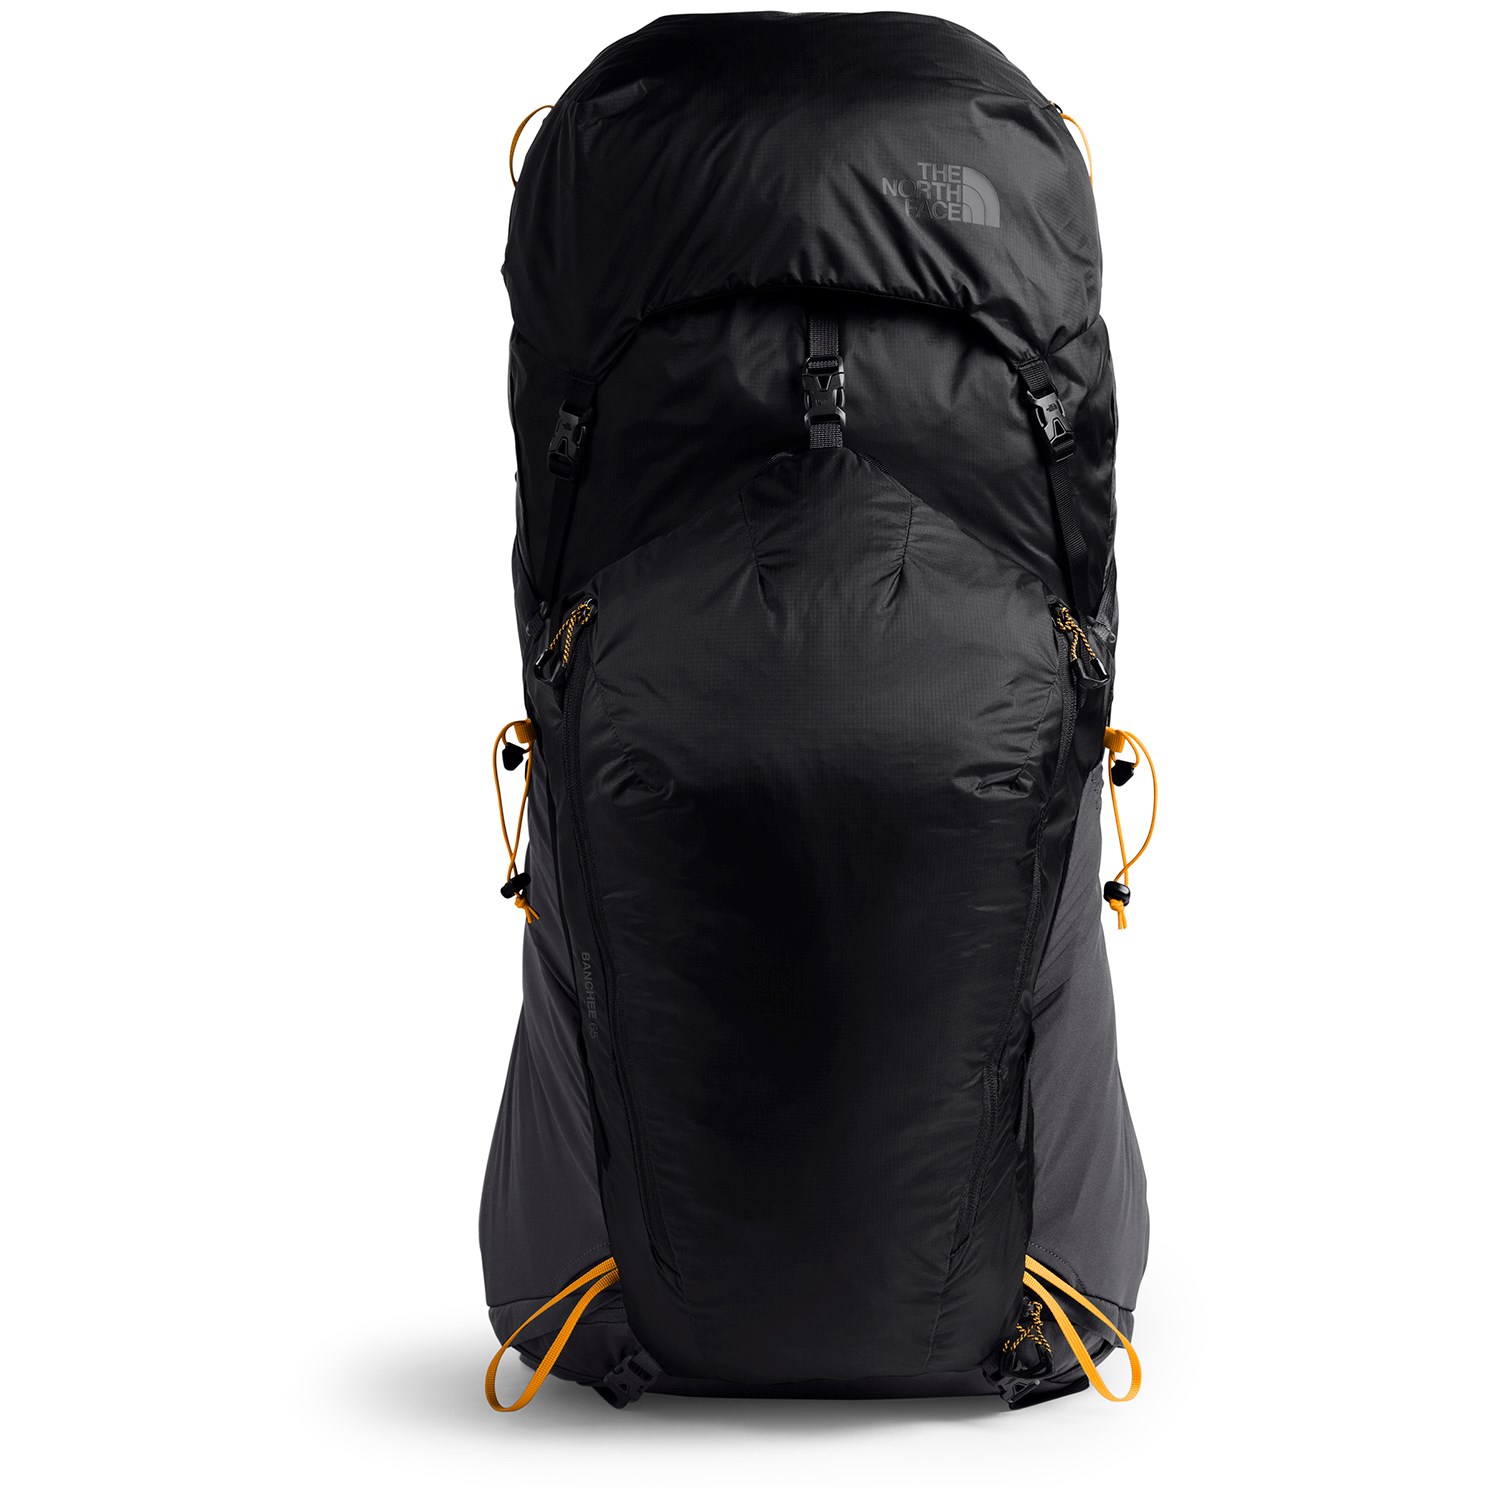 banchee 50 backpack review